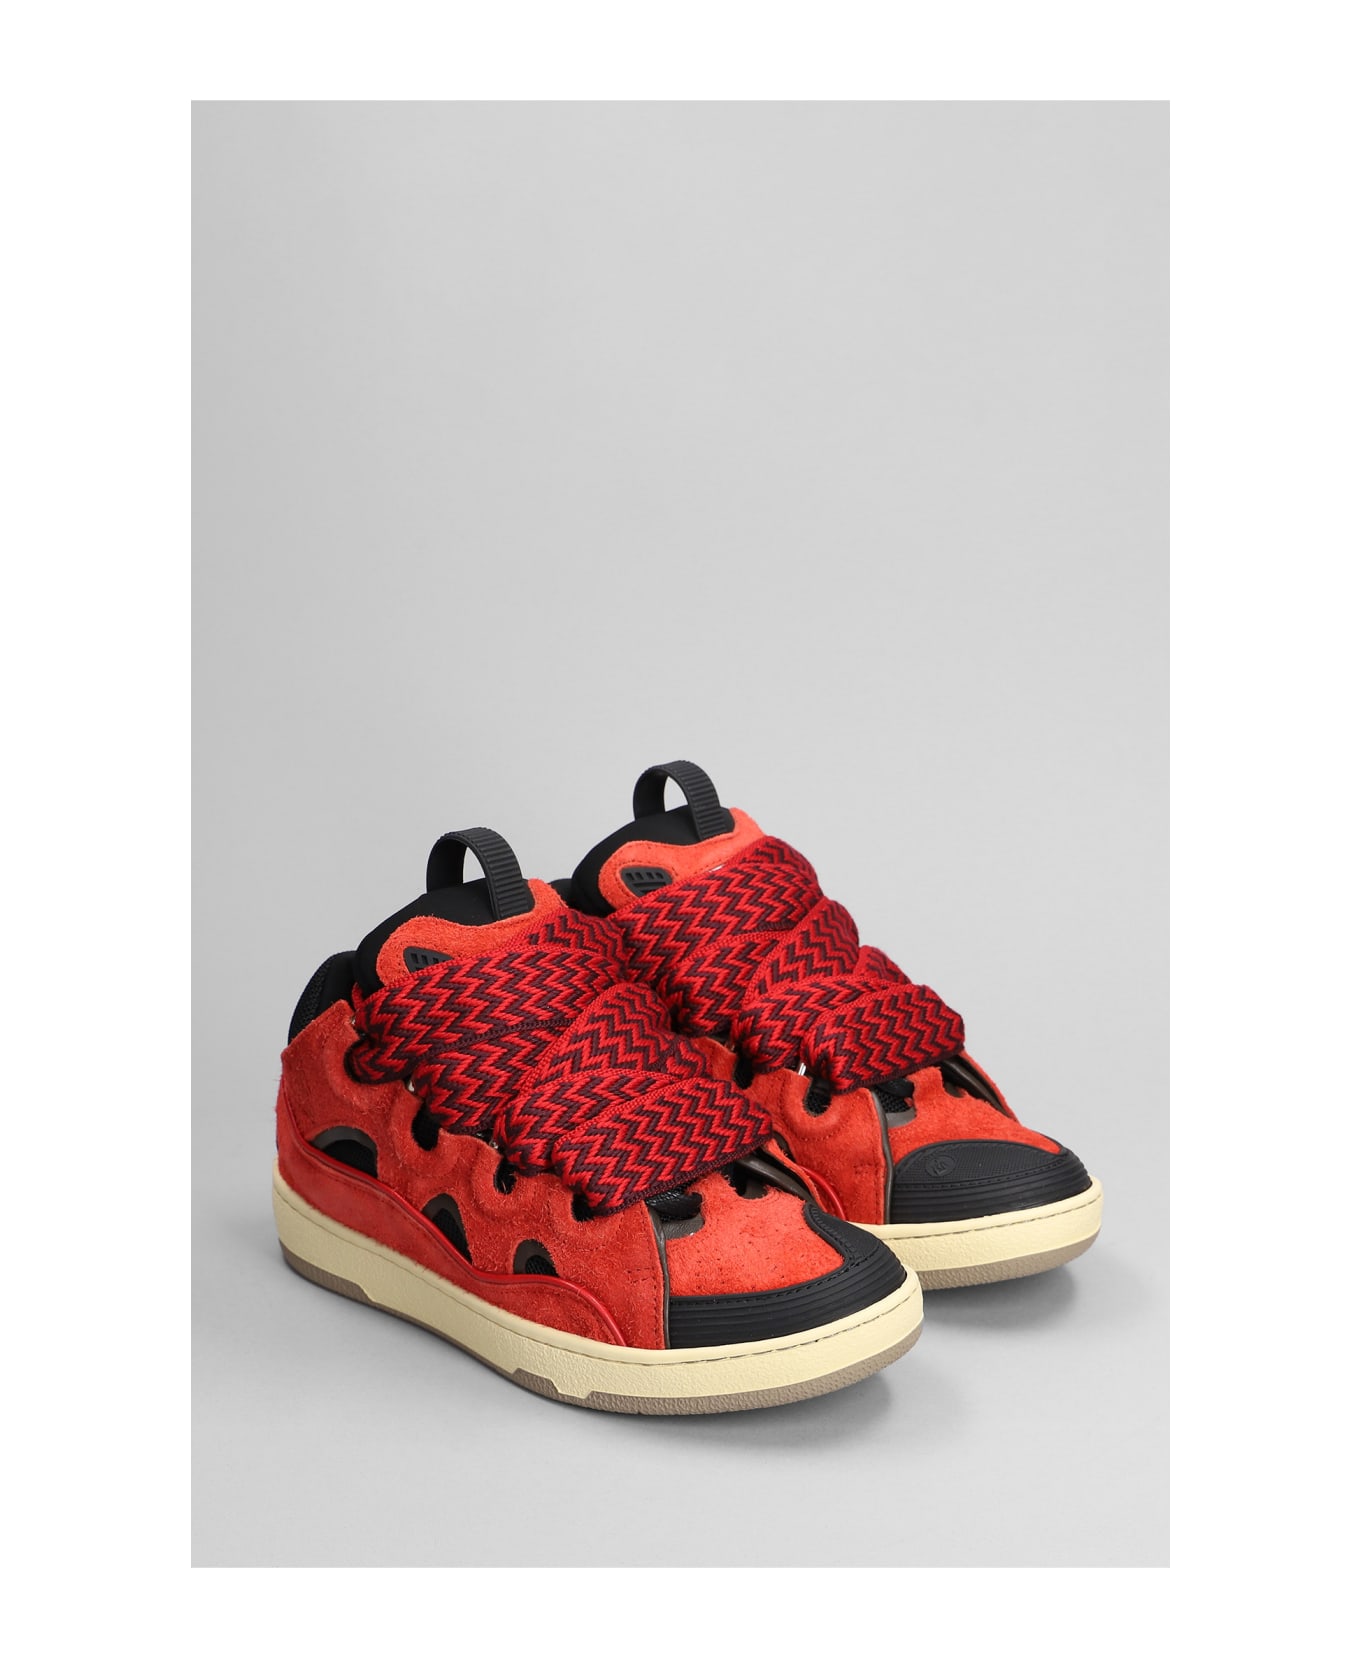 Lanvin Curb Sneakers In Red Suede - red